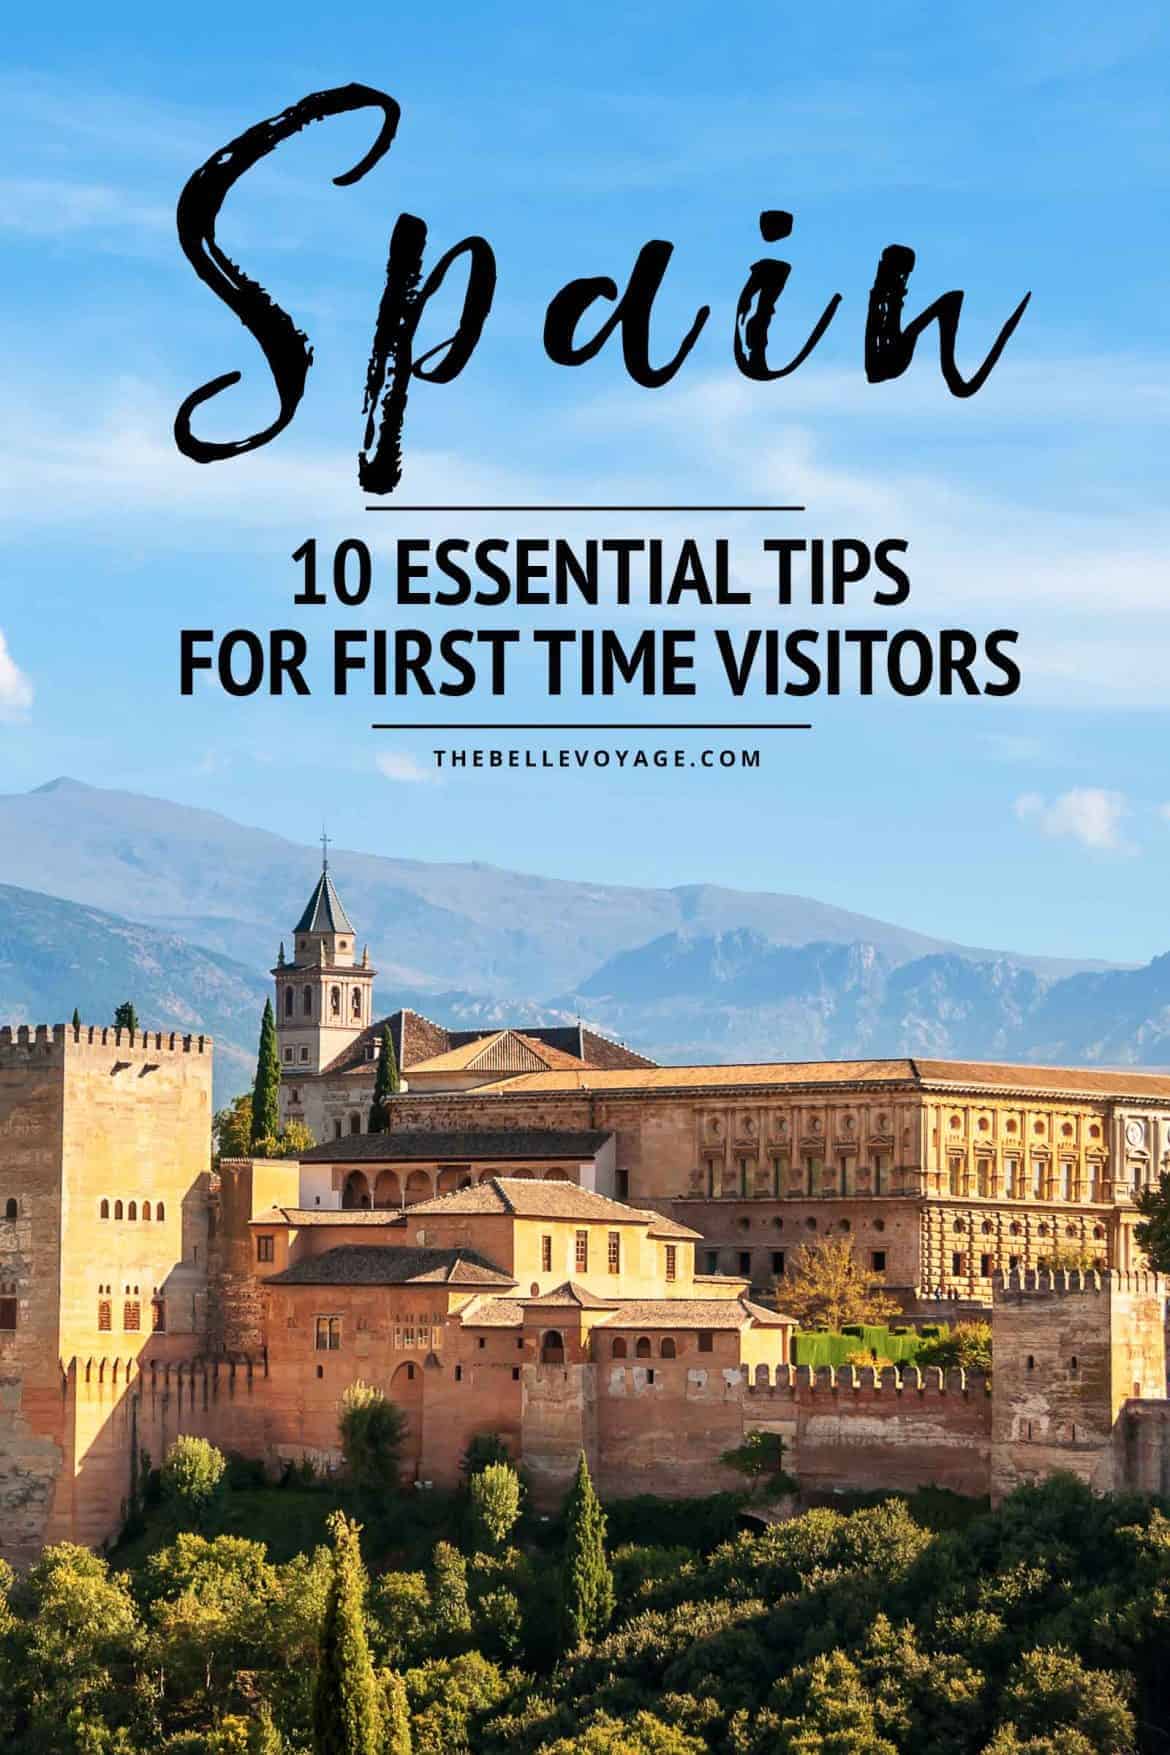 Top 10 Essential Spain Travel Tips Do's and Don'ts When Visiting Spain